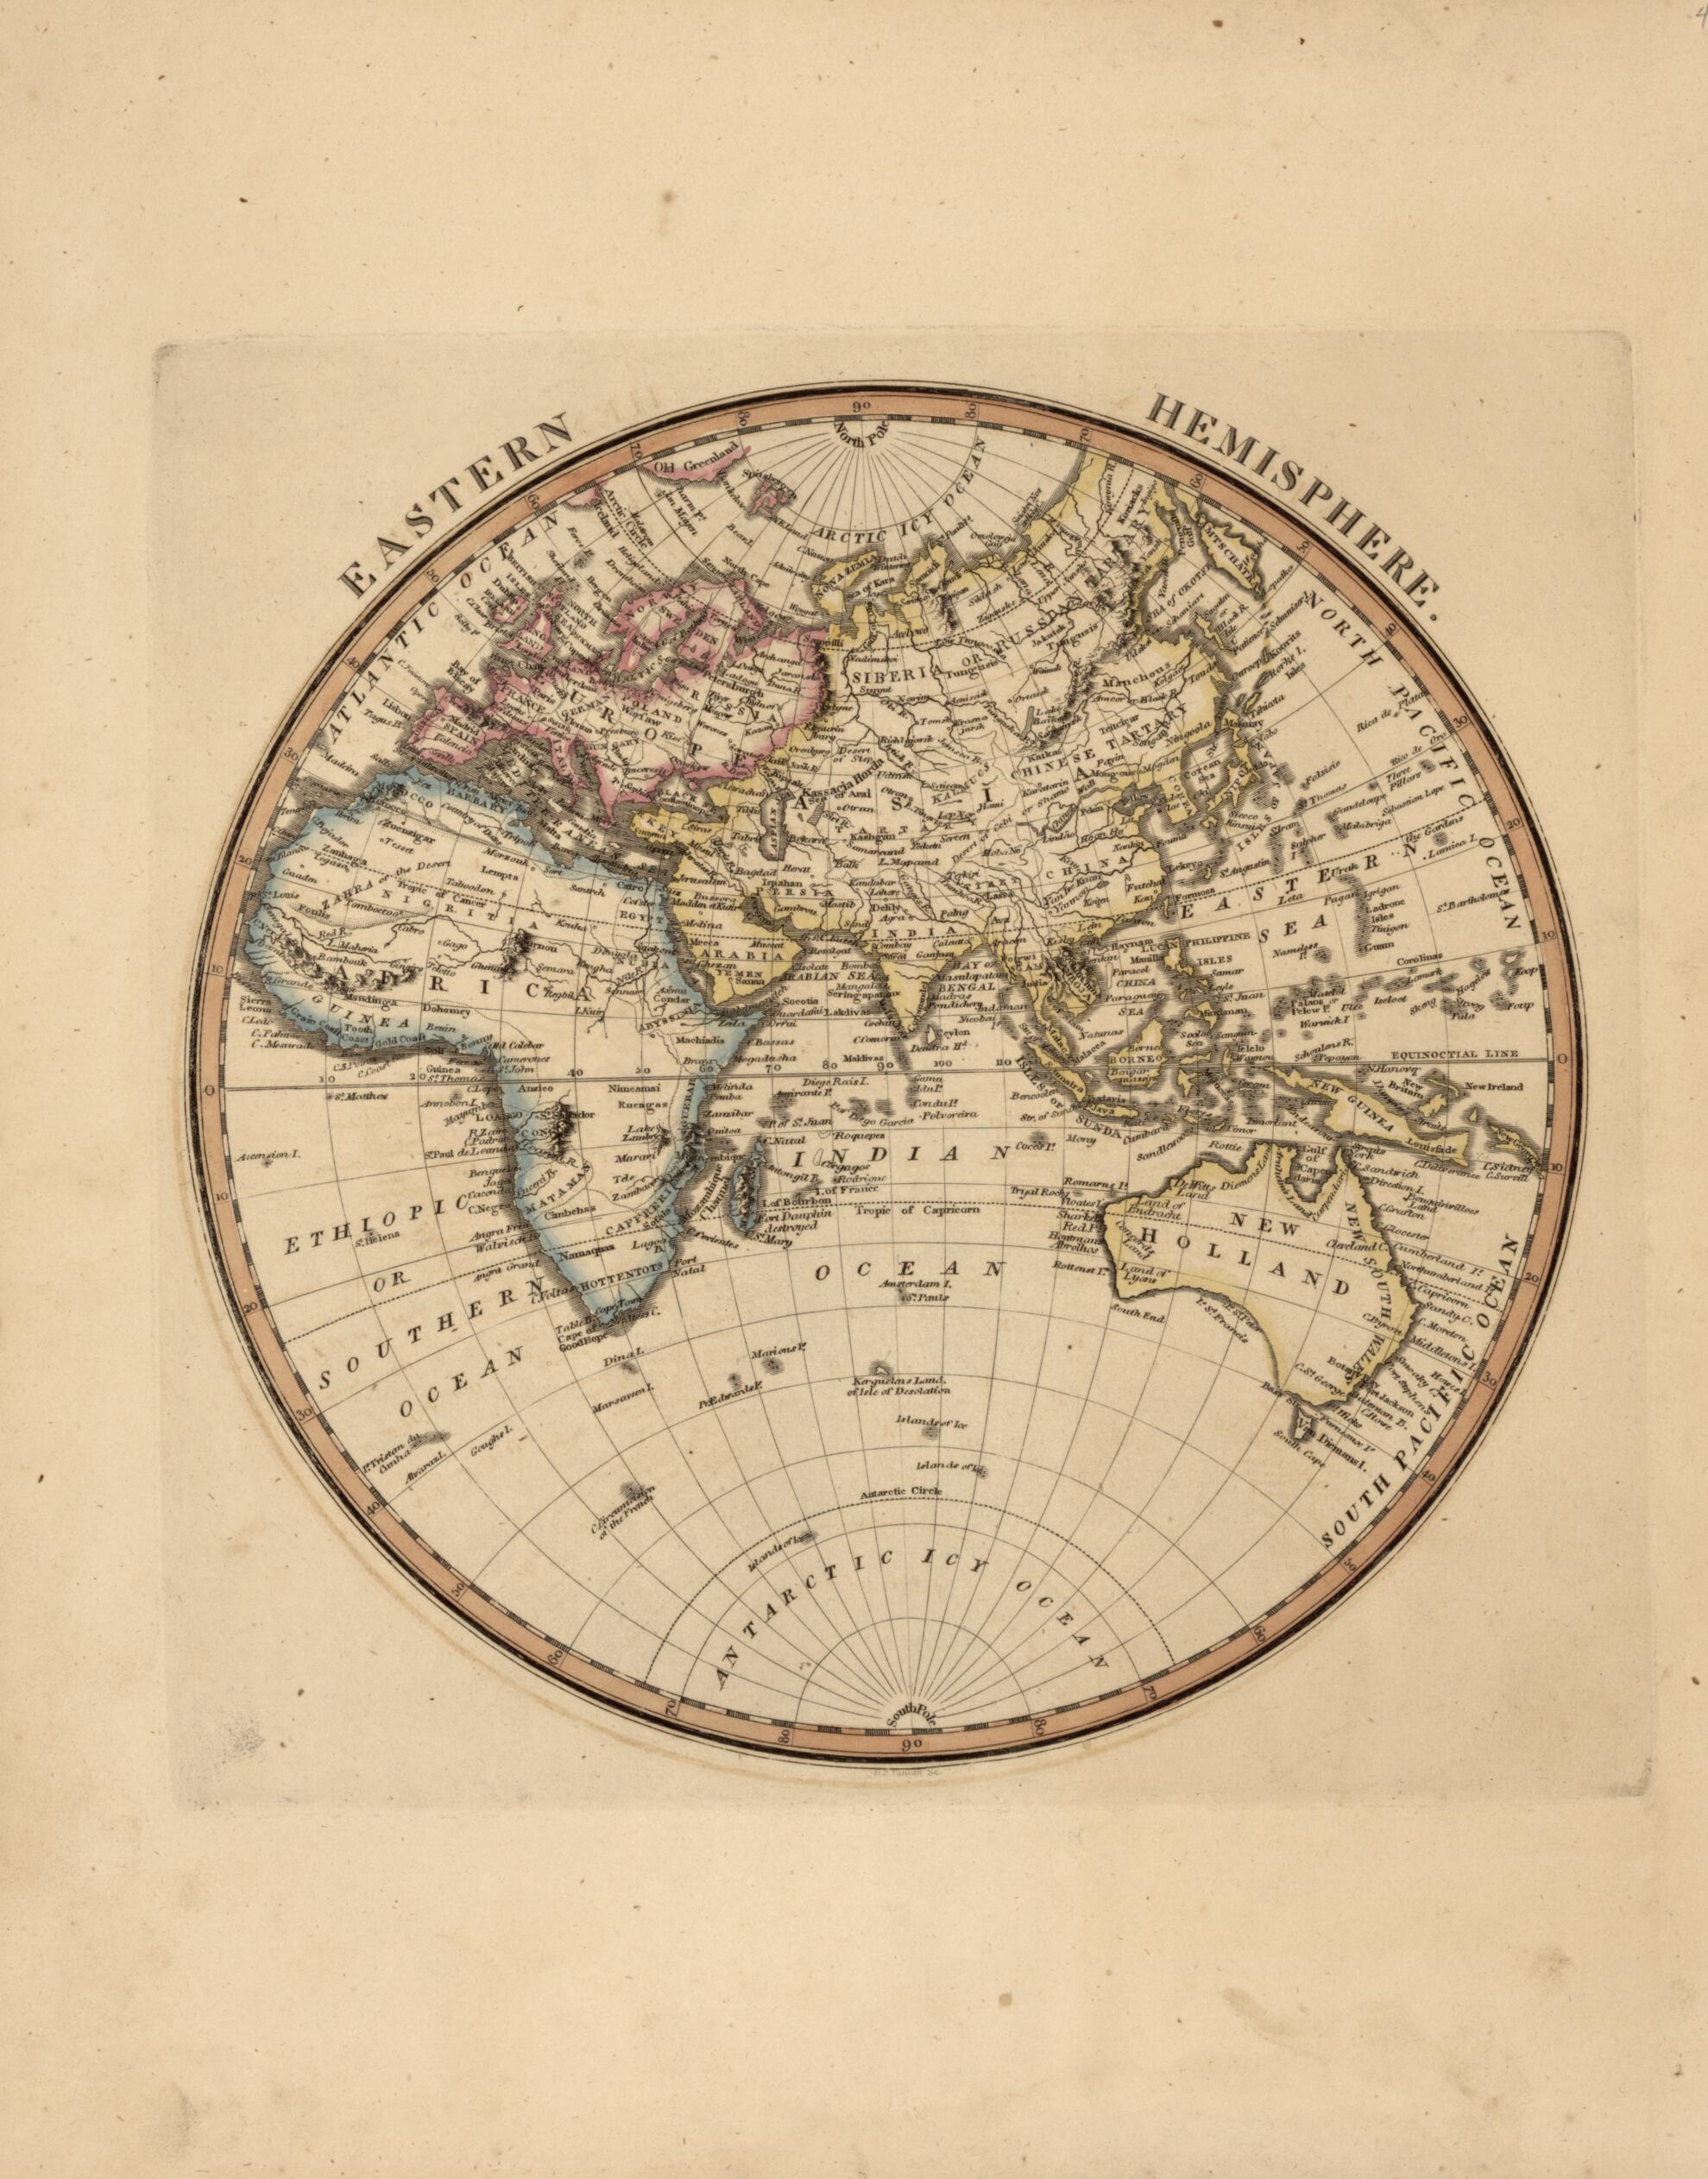 This old map of Eastern Hemisphere from a New and Elegant General Atlas, Containing Maps of Each of the United States. from 1817 was created by Henry Schenck Tanner in 1817